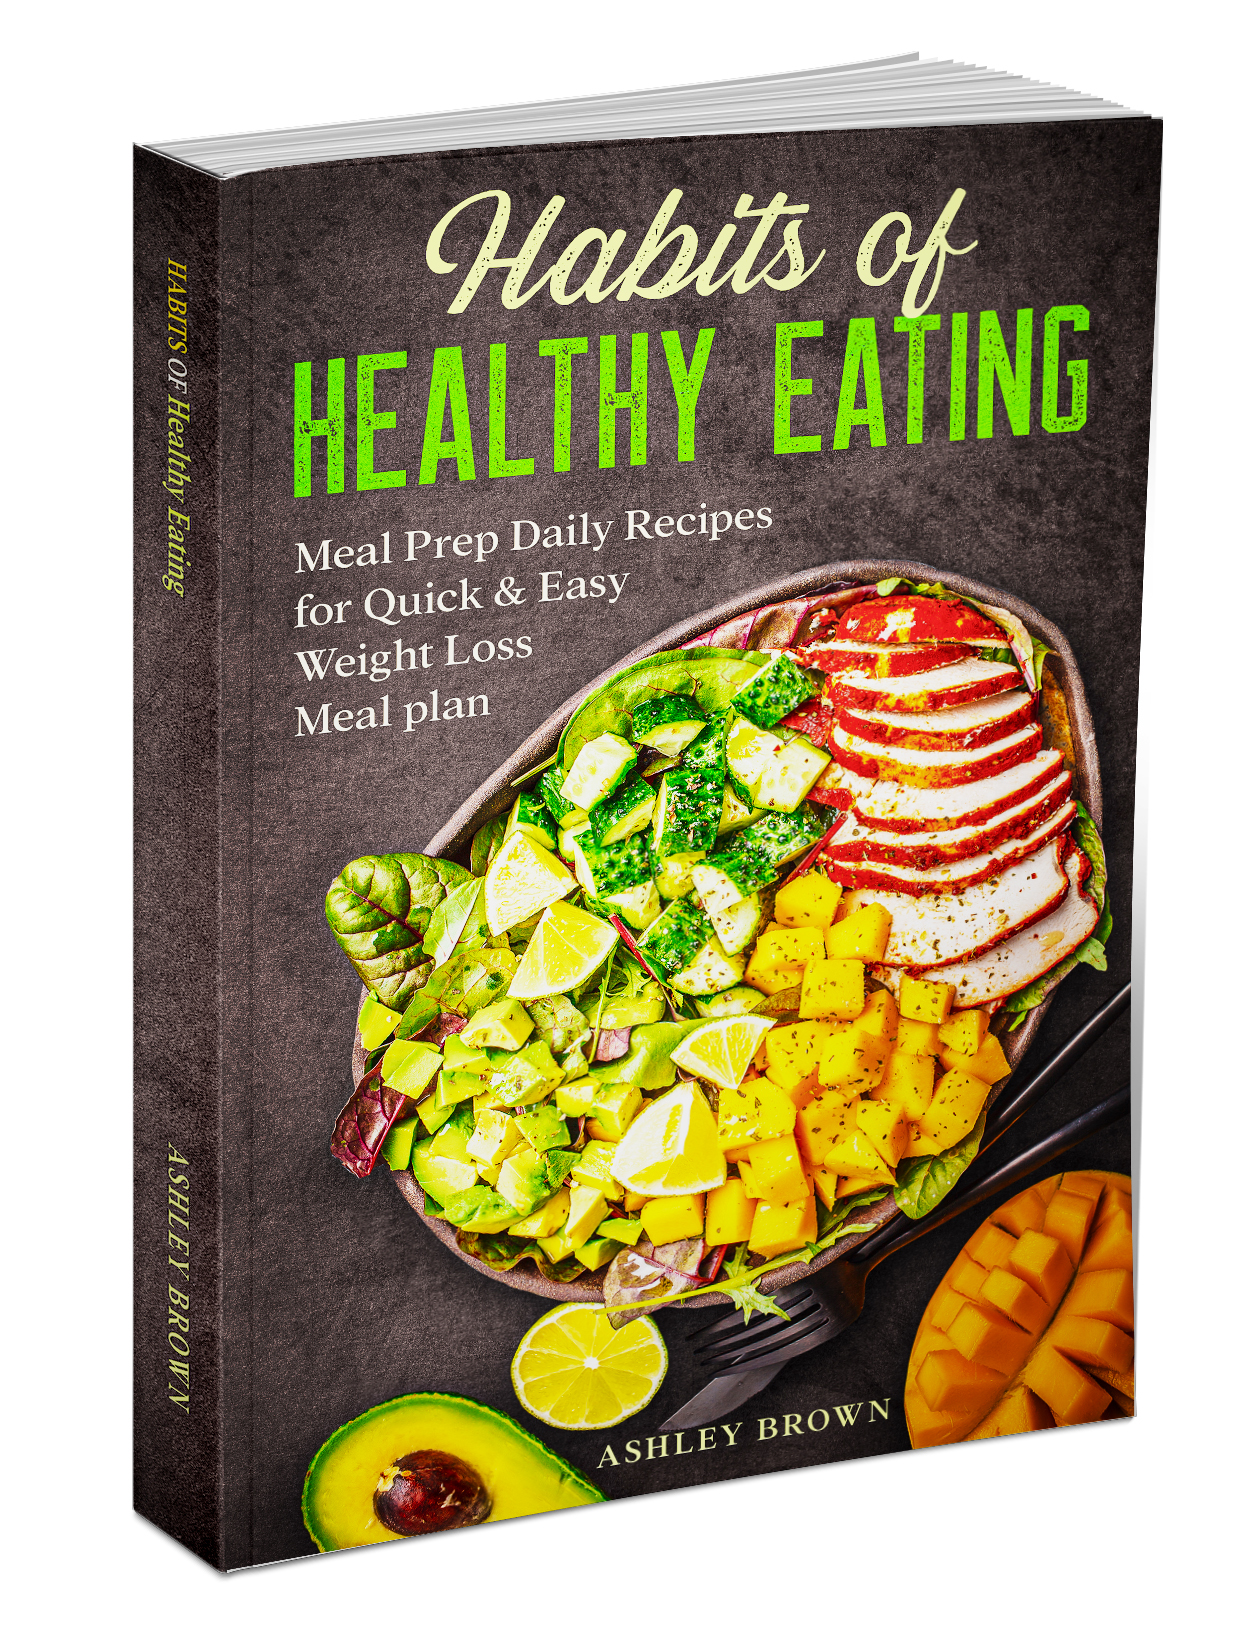 FREE: HABITS OF HEALTHY EATING: Meal Prep Daily Recipes for Quick & Easy Weight Loss Meal plan by Ashley Brown